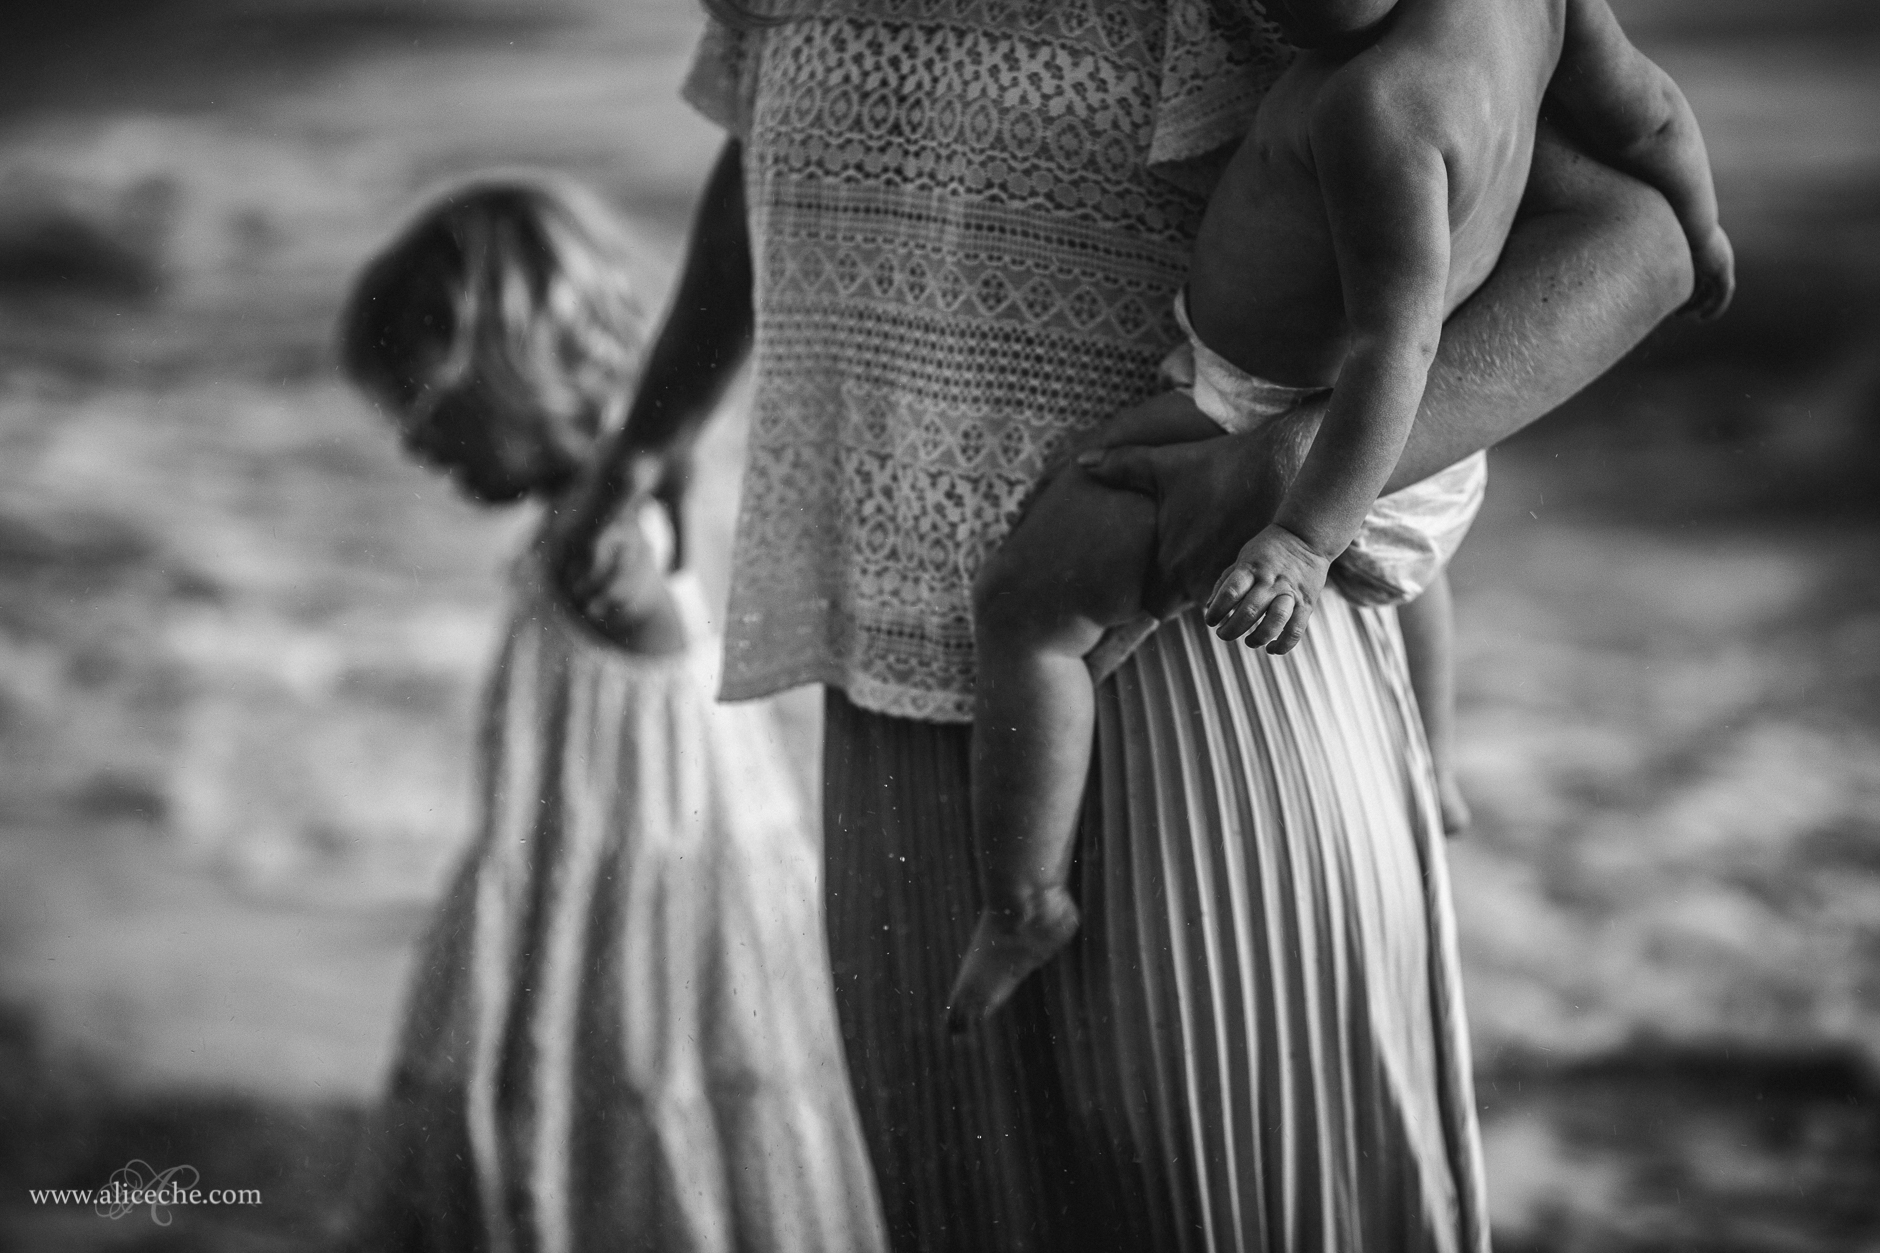 alice-che-photography-blair-thurston-retreat-malibu-family-session-mom-walking-with-baby-and-daughter